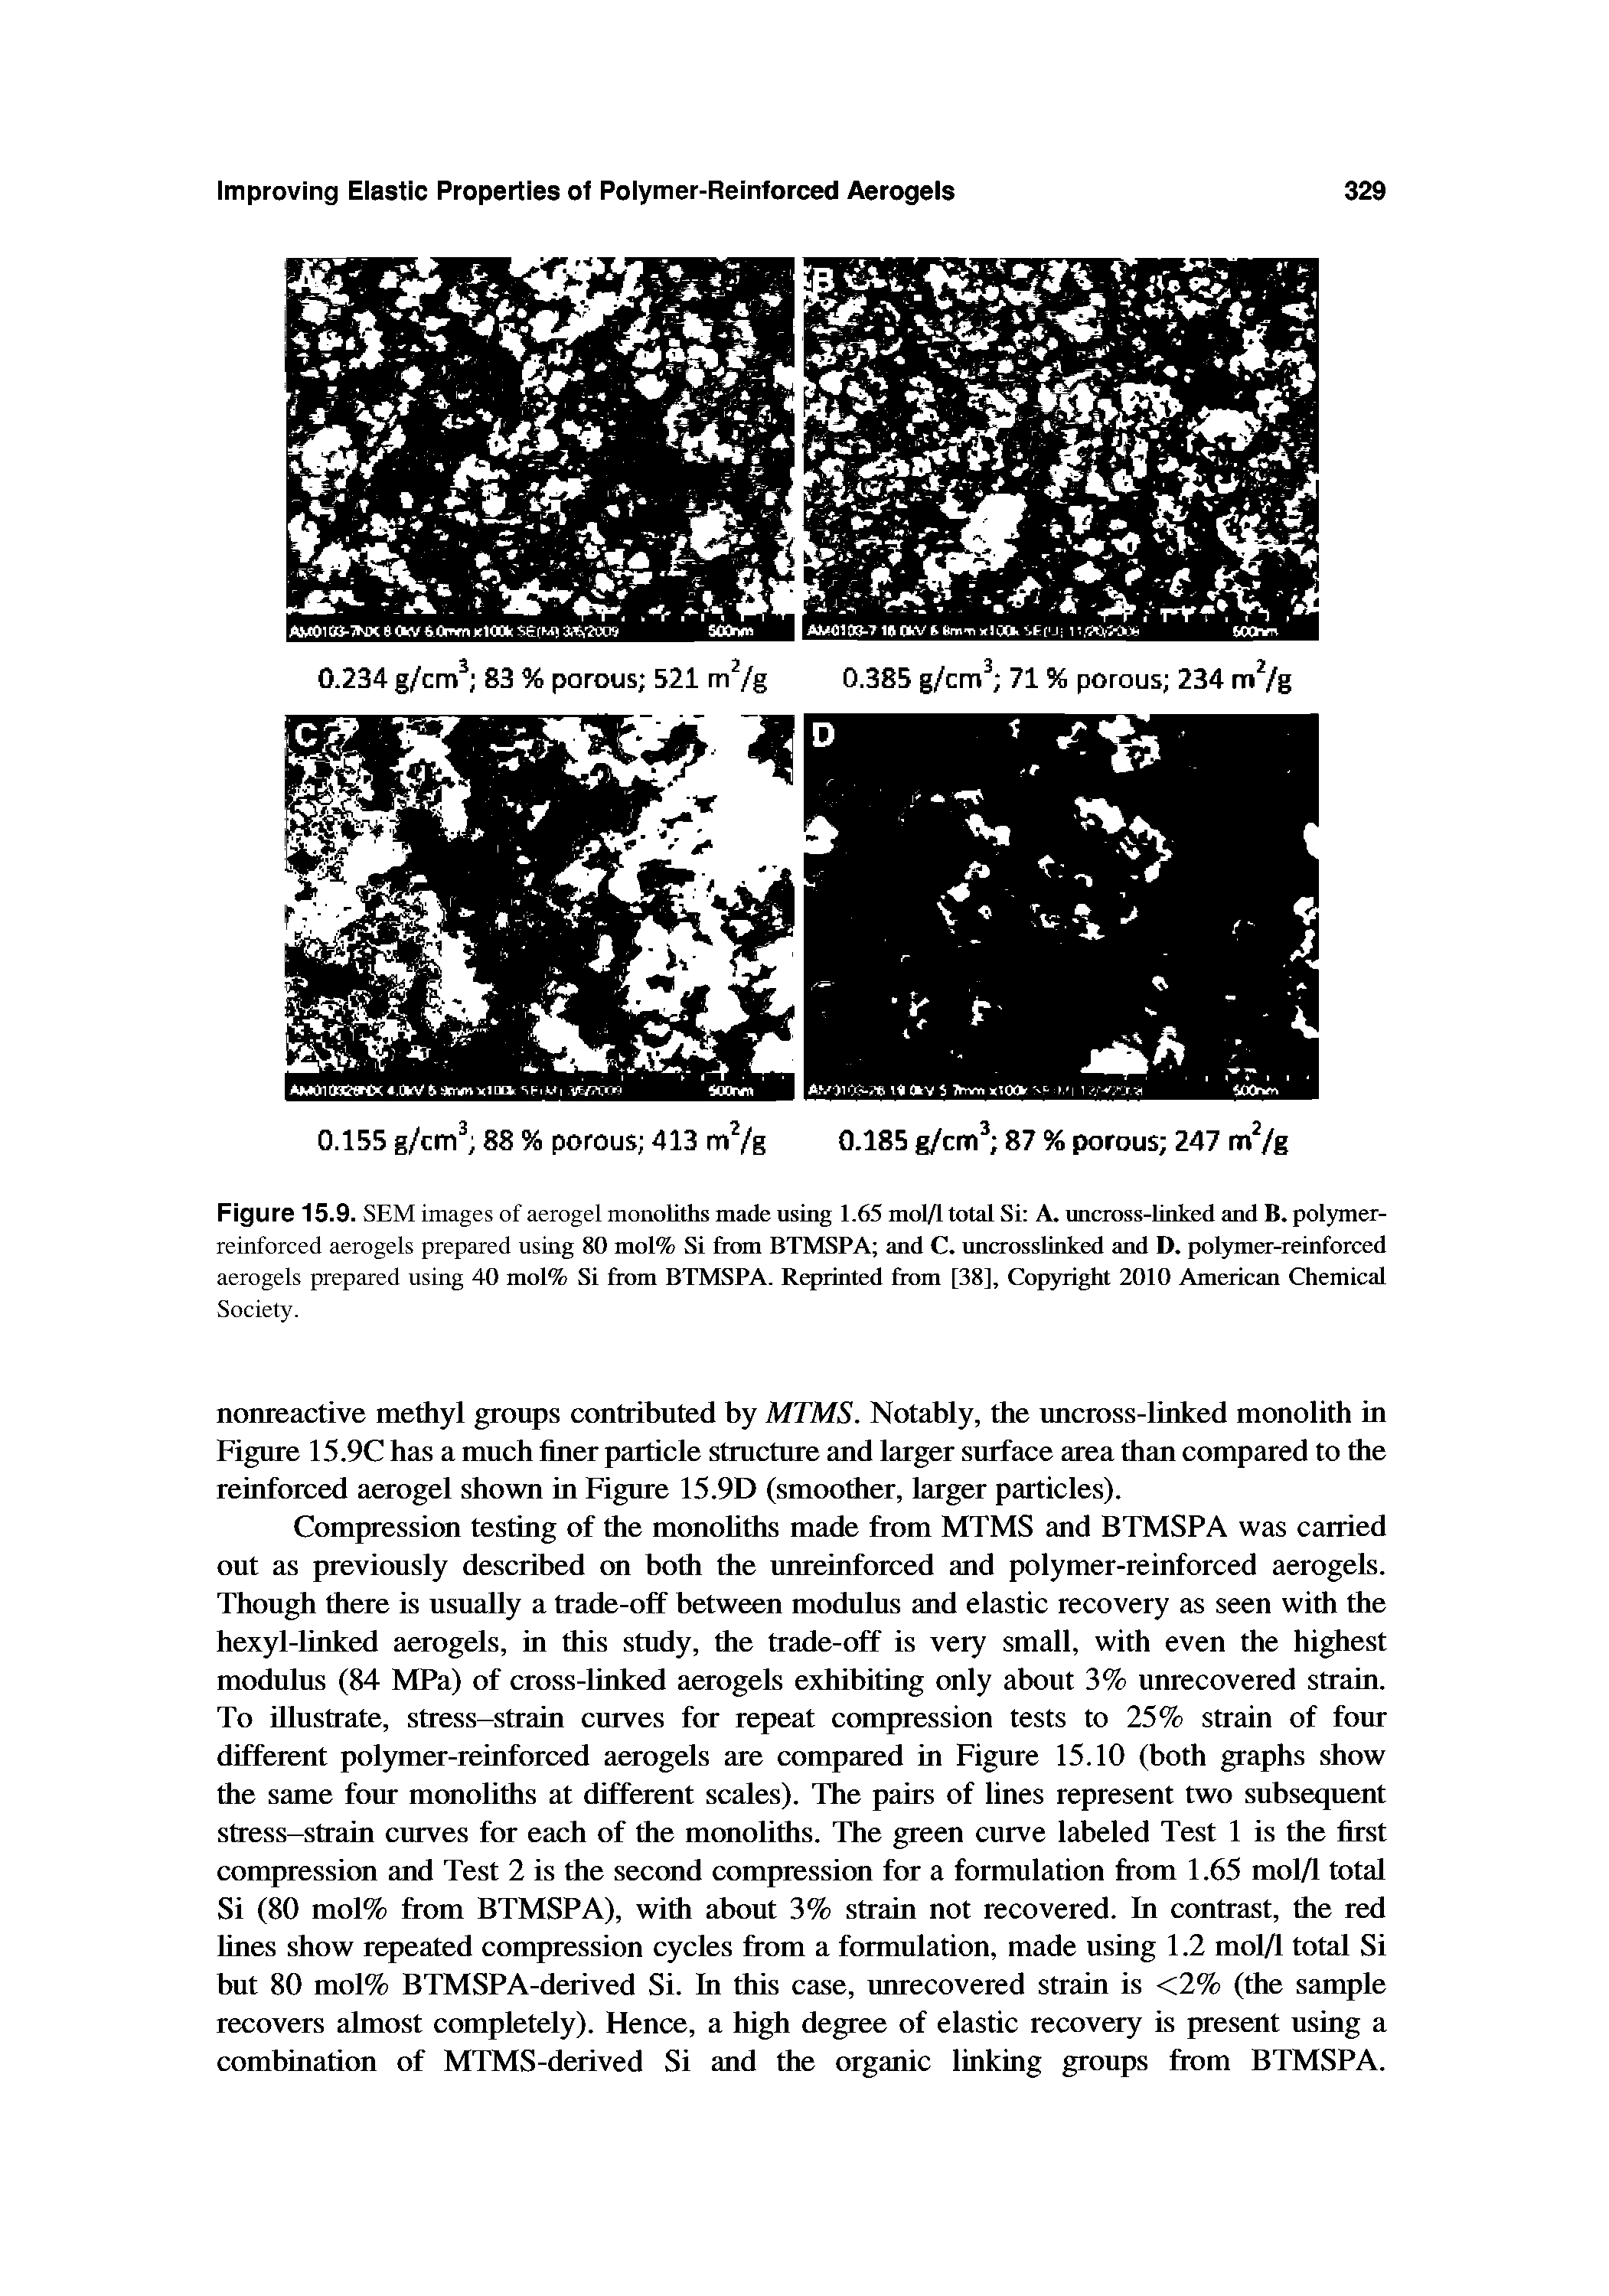 Figure 15.9. SEM images of aerogel monoliths made using 1.65 mol/1 total Si A. uncross-linked and B. polymer-reinforced aerogels prepared using 80 mol% Si from BTMSPA and C. uncrosslinked and D. polymer-reinforced aerogels prepared using 40 mol% Si from BTMSPA. Rqmnted from [38], Copyright 2010 American Chemical...